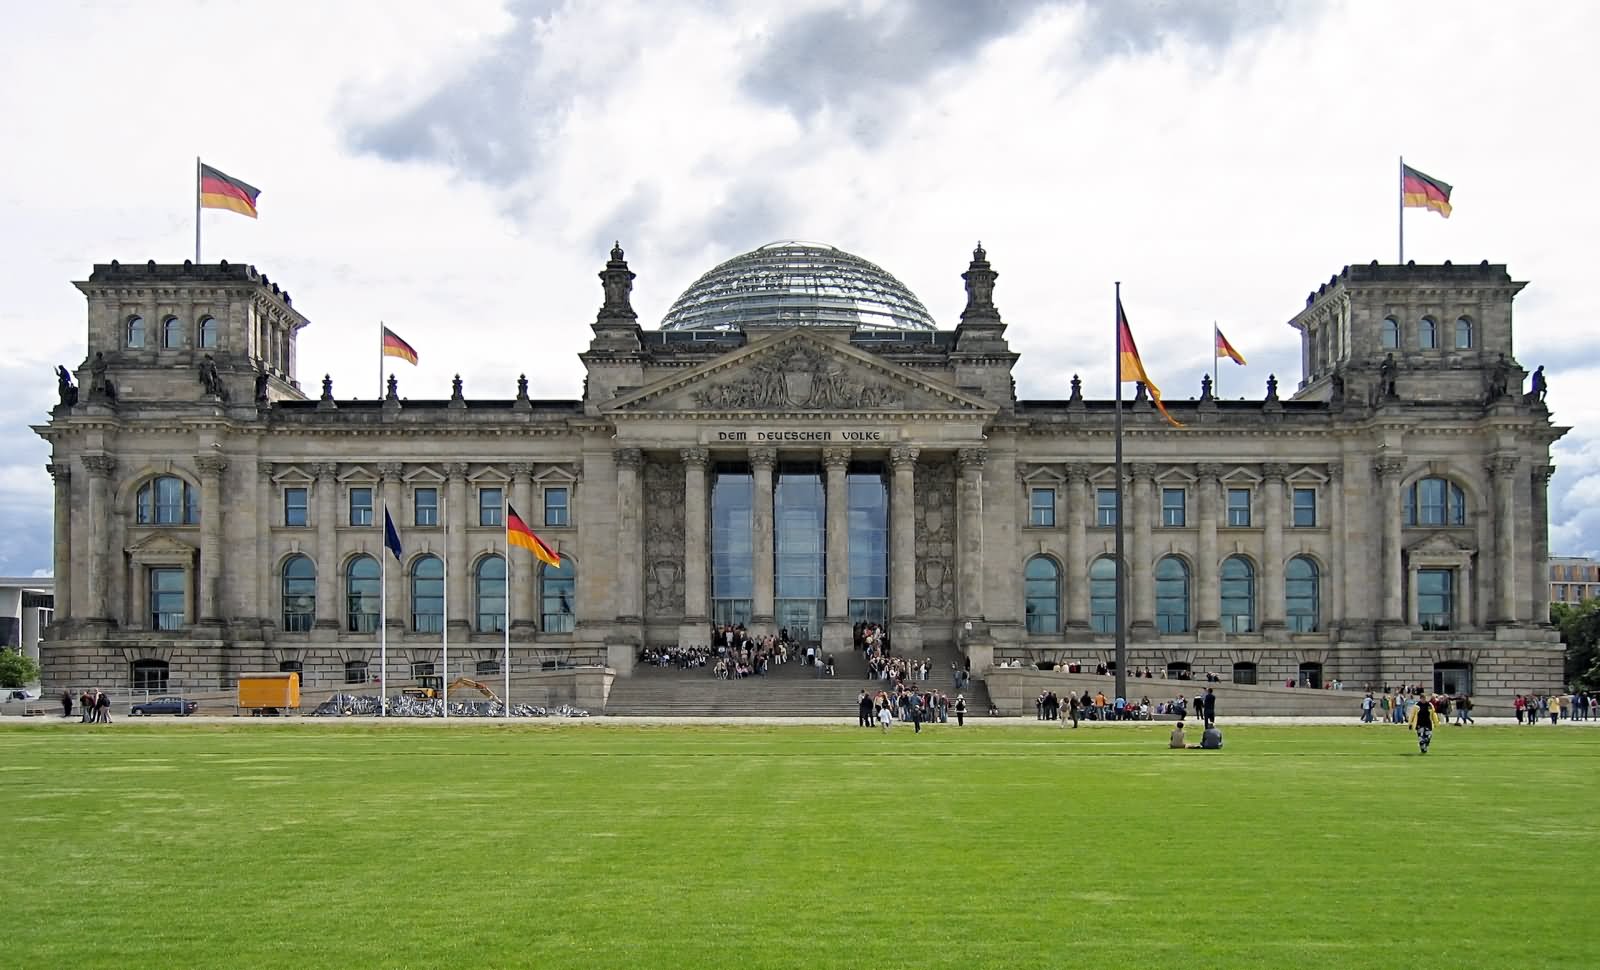 40 Beautiful Images And Photos Of Reichstag Building In Berlin, German